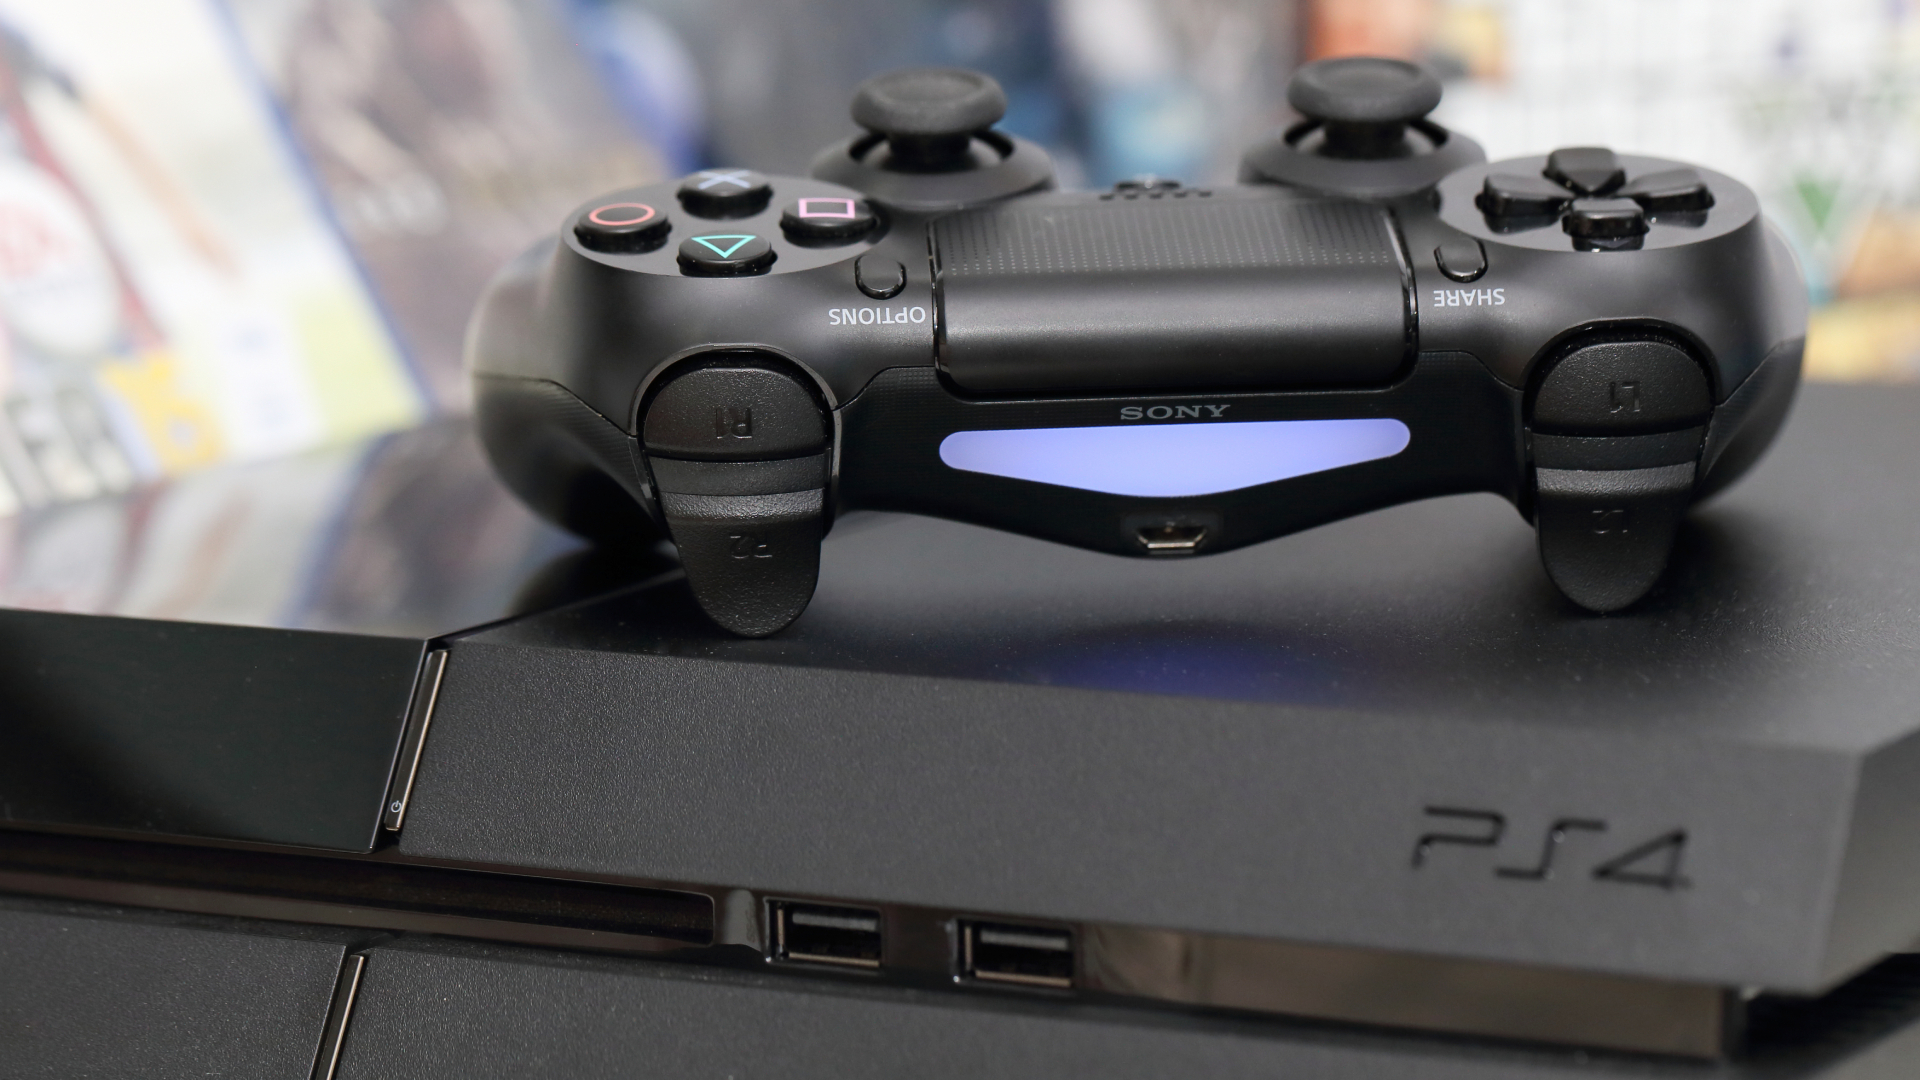 DualShock 4 controller sat on top of a PS4 console